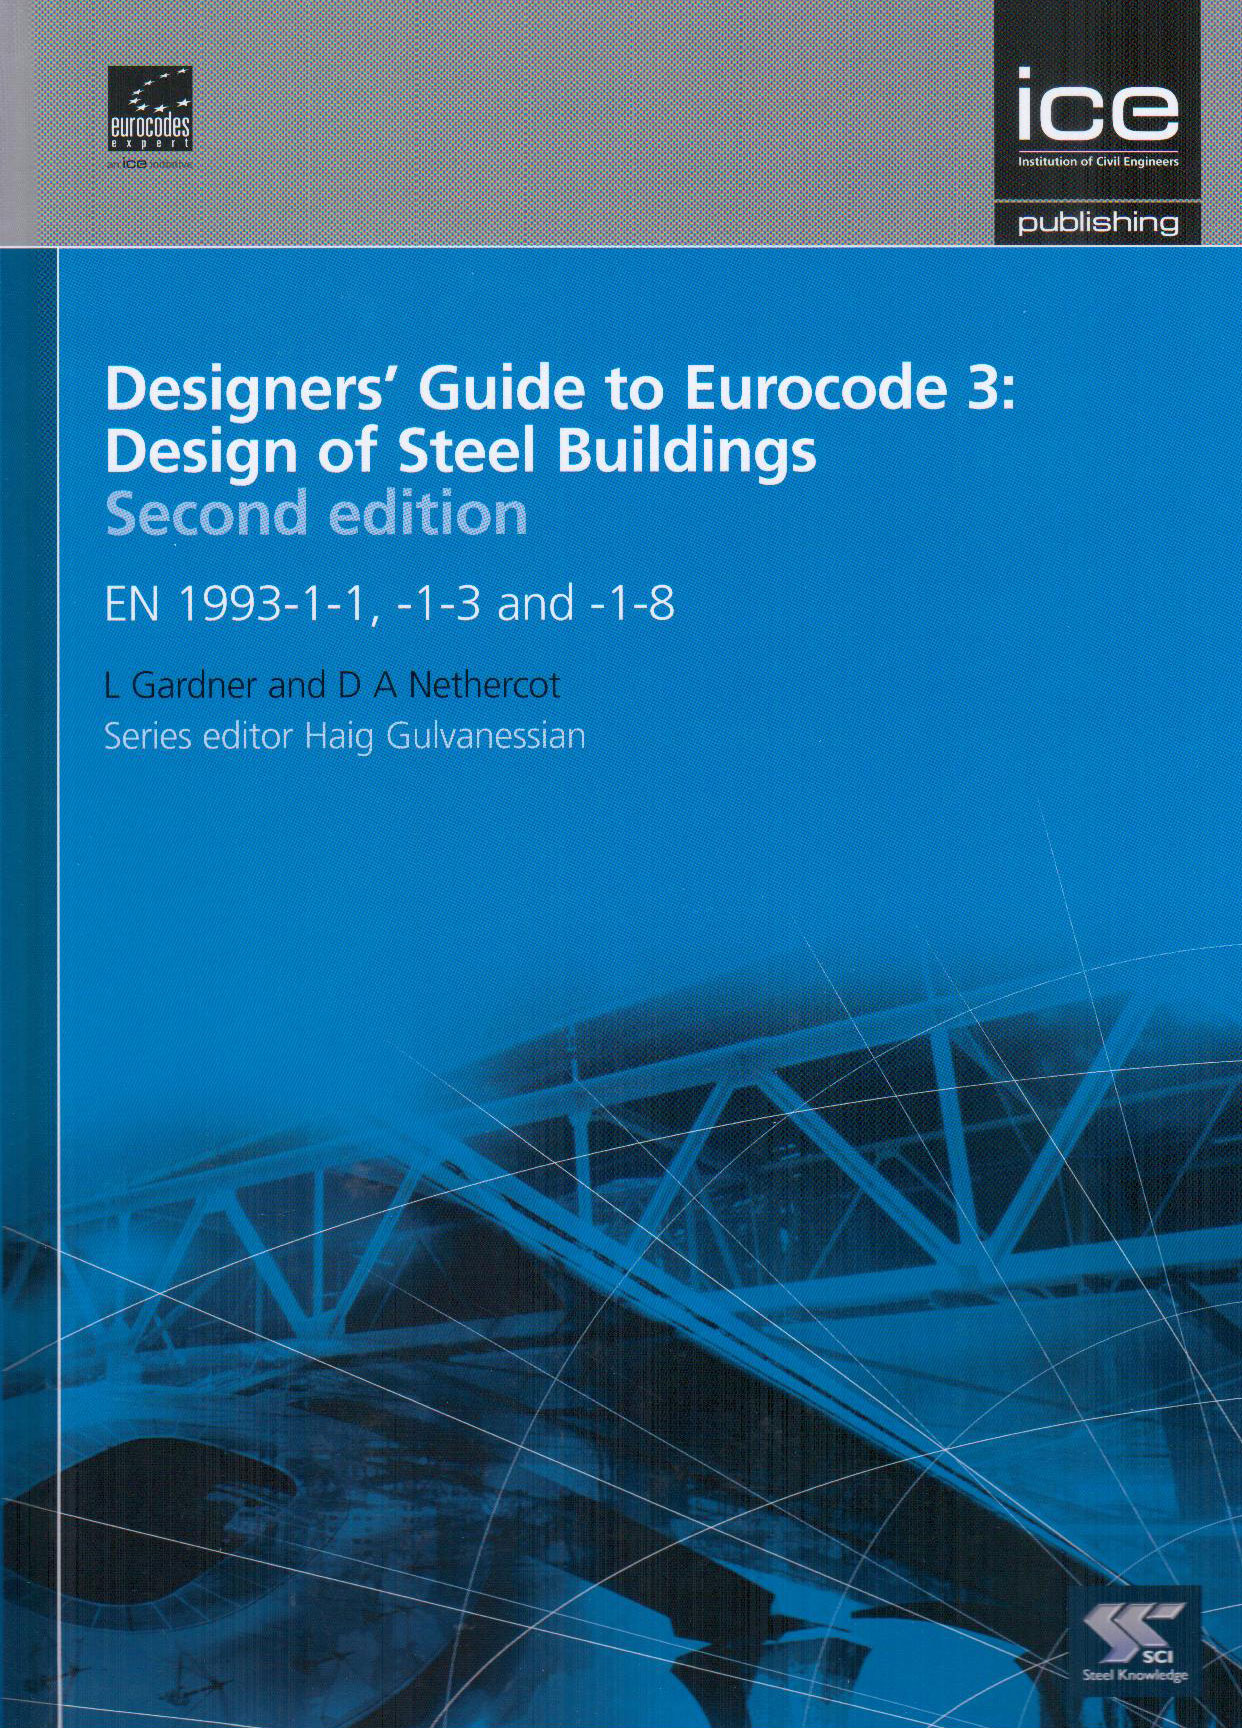 Designers' Guide to Eurocode 3 Design of Steel Buildings, 2nd Edition